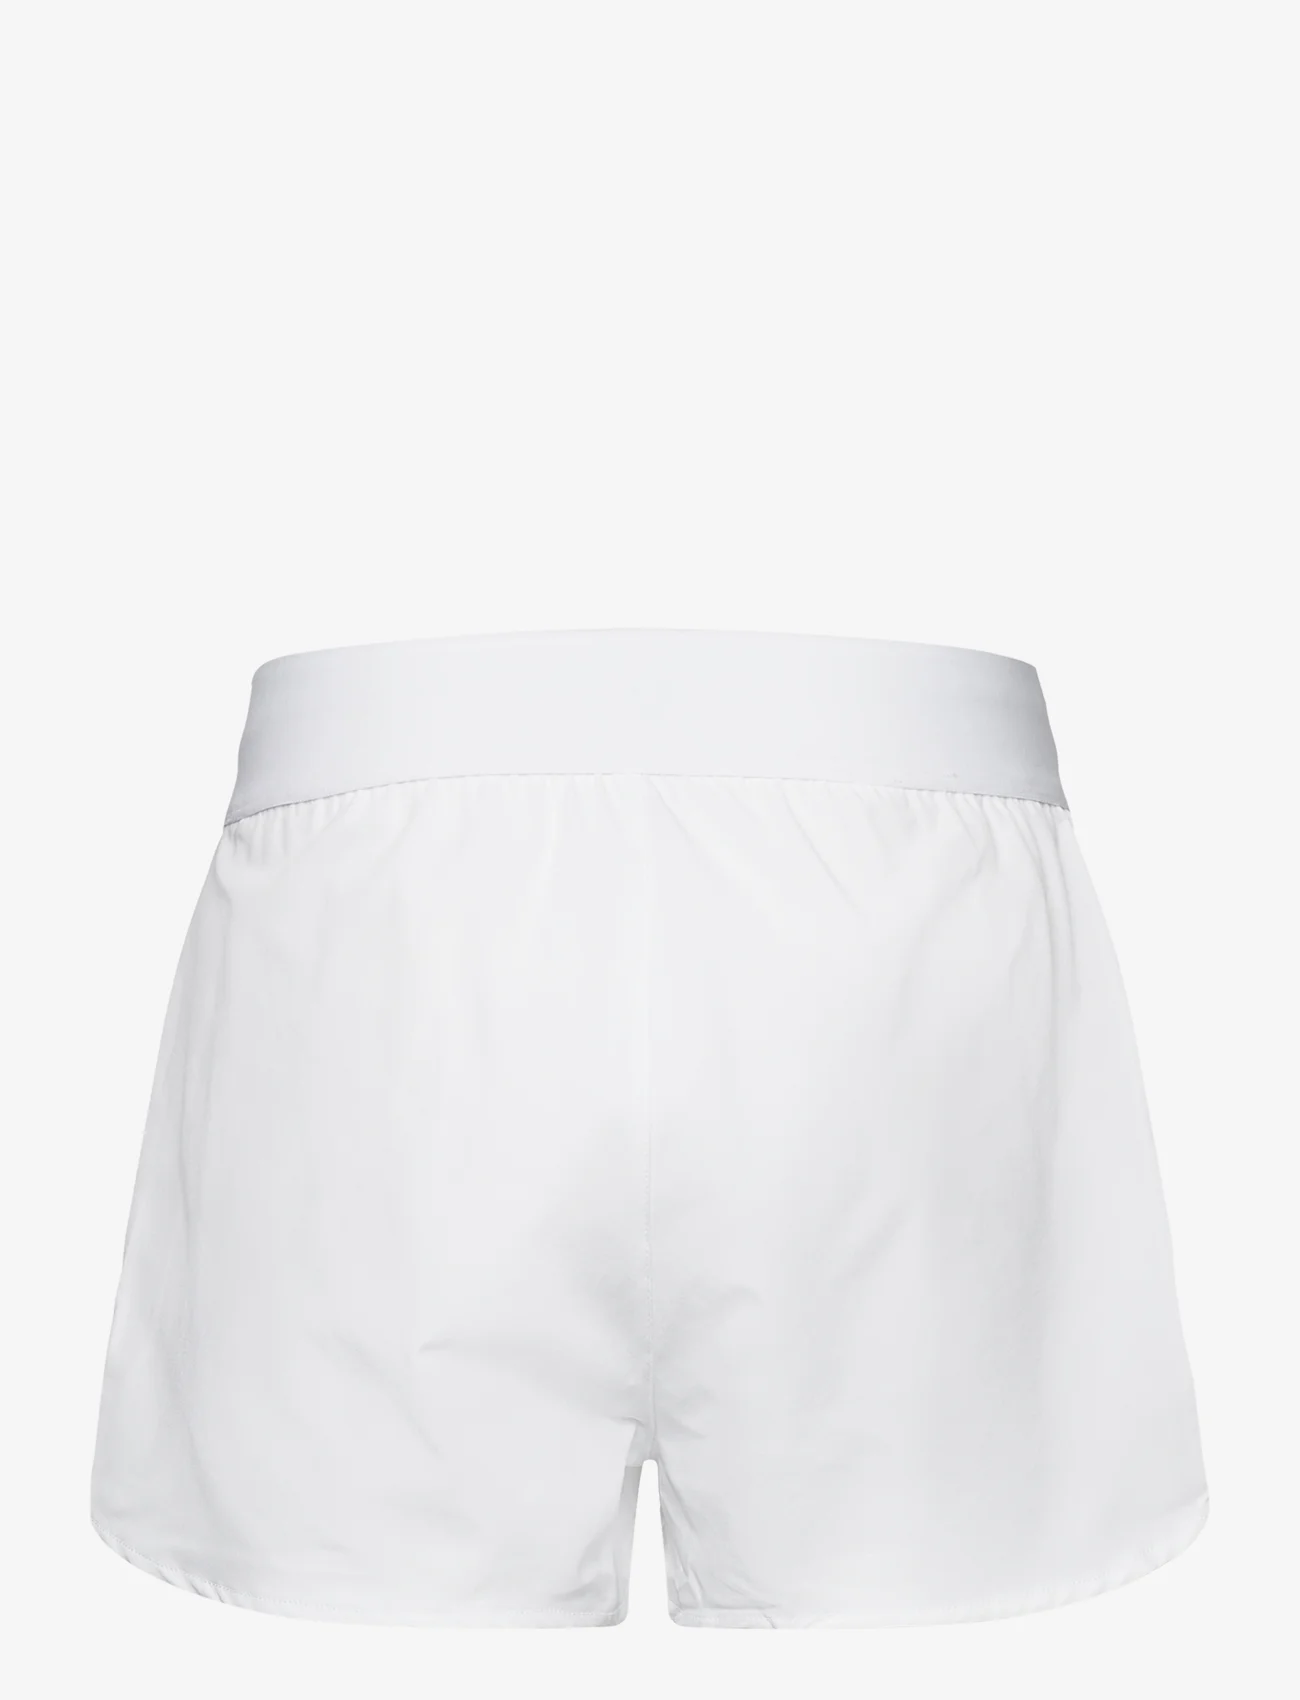 Björn Borg - ACE SHORTS 2 IN 1 - sports shorts - brilliant white - 1